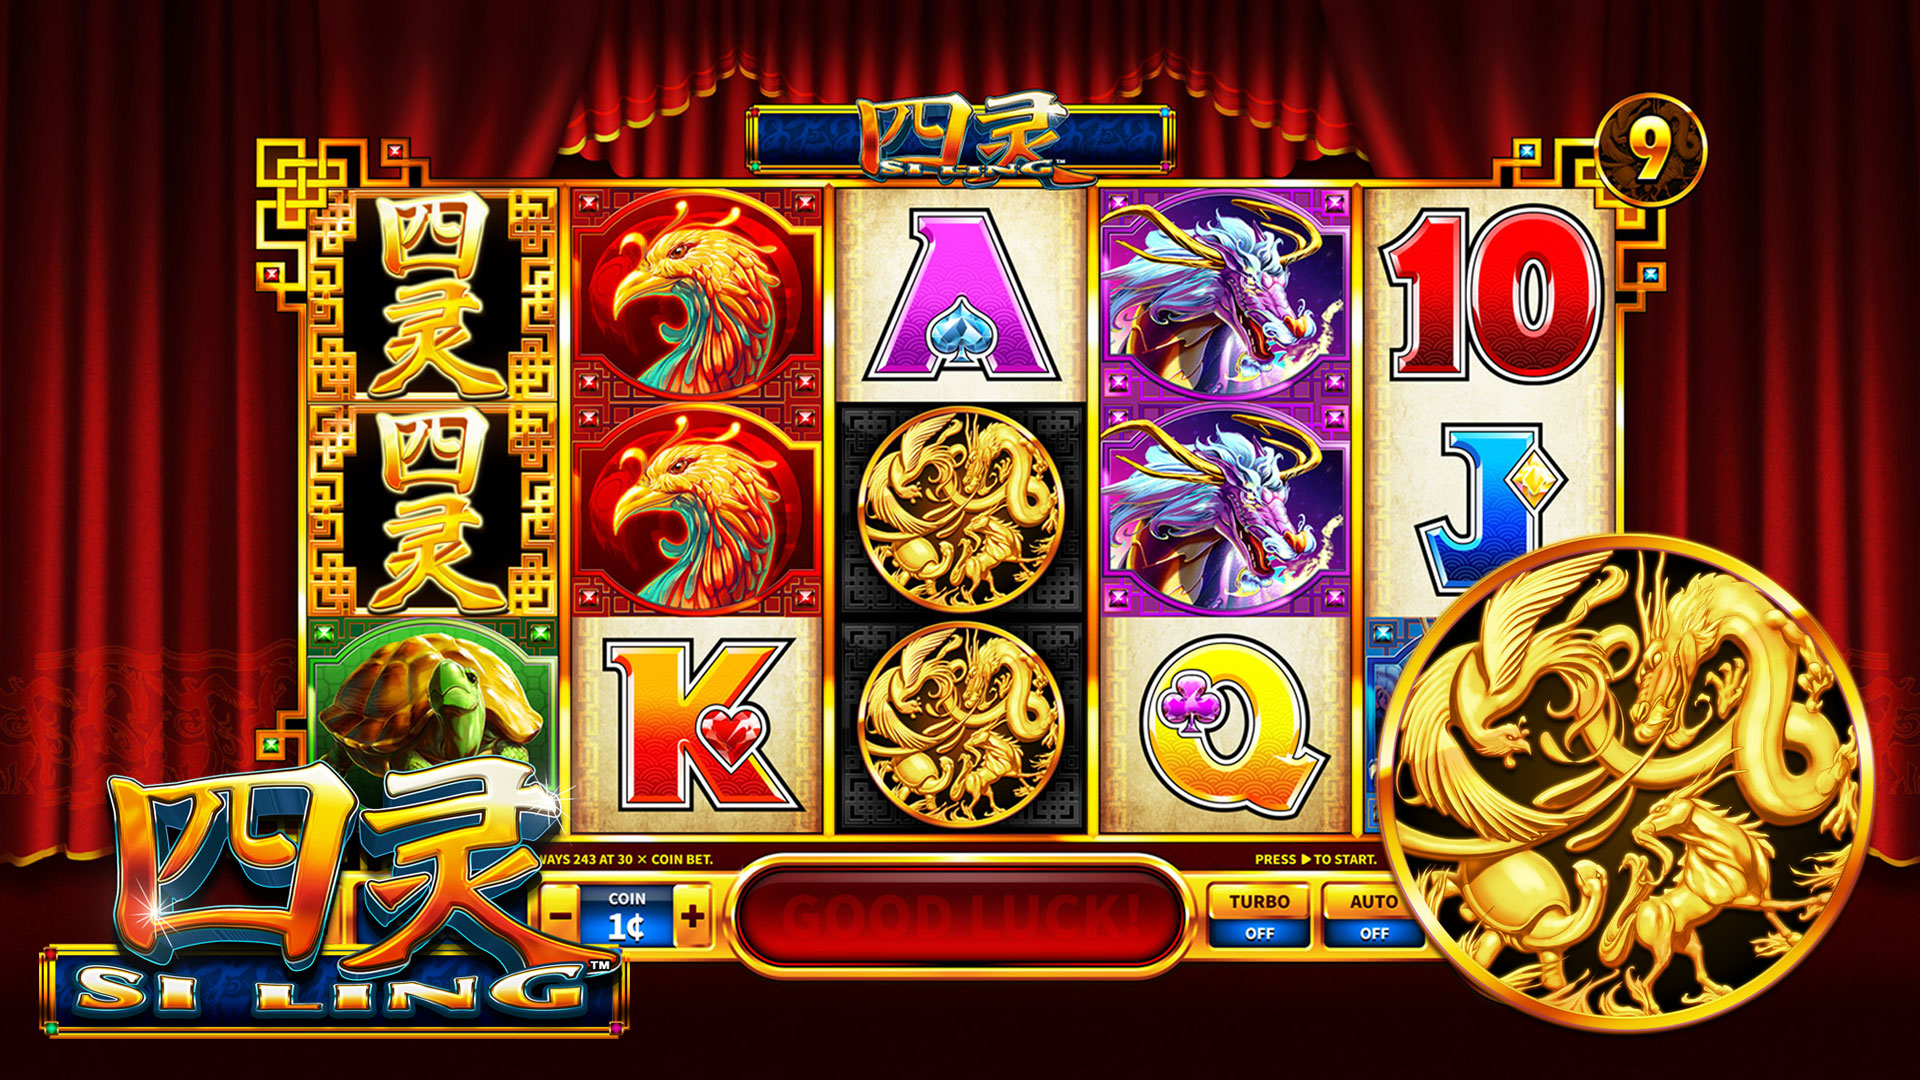 Si Ling is a Slots Game Provided by the Vendor Partner Skywind Group - GamingSoft